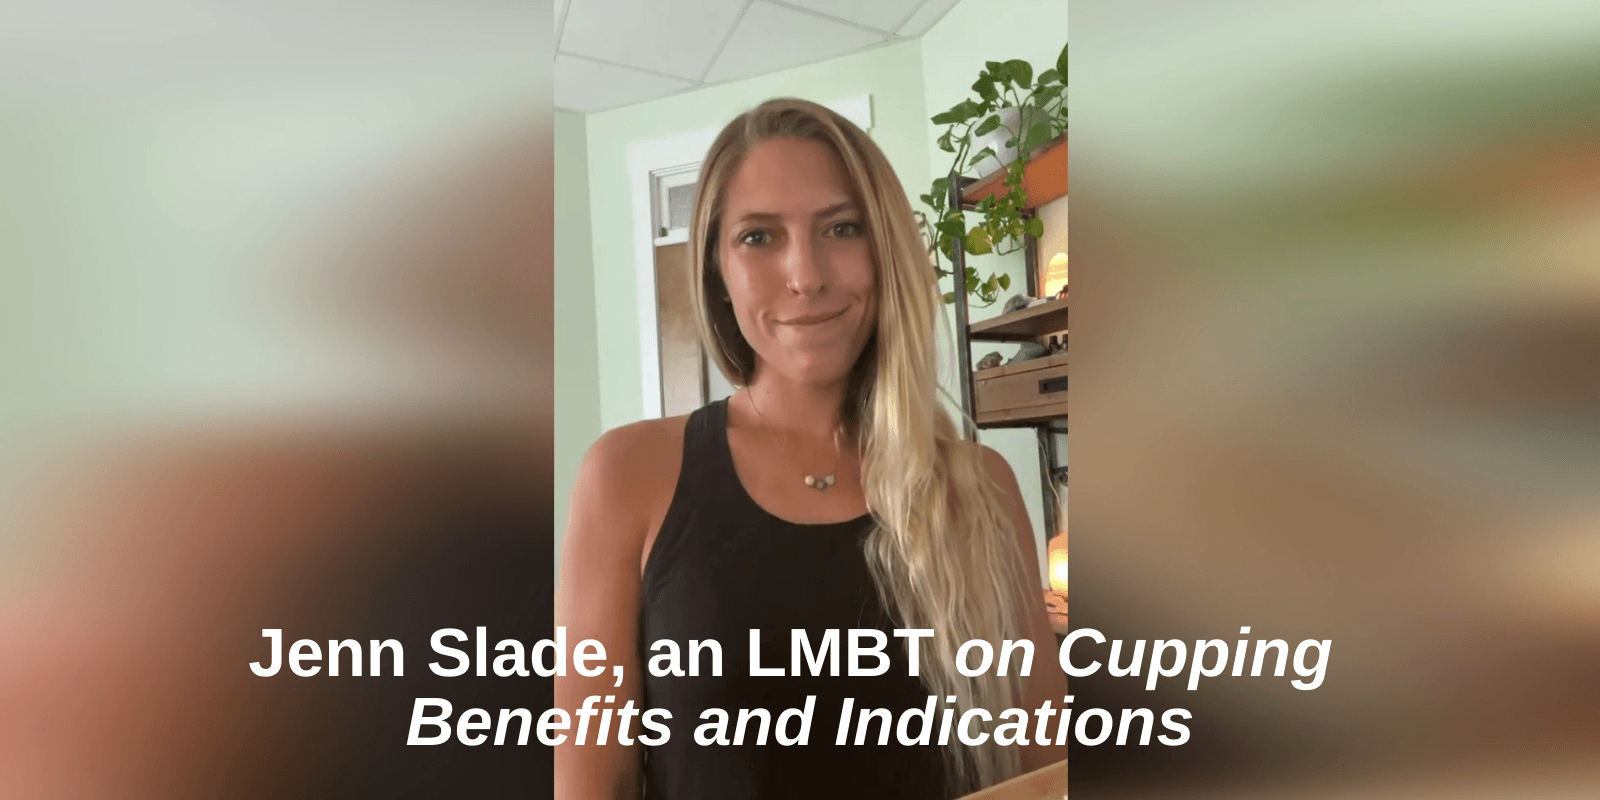 GO CUP YOURSELF Part 3: Cupping Benefits & Indications - Lure Essentials